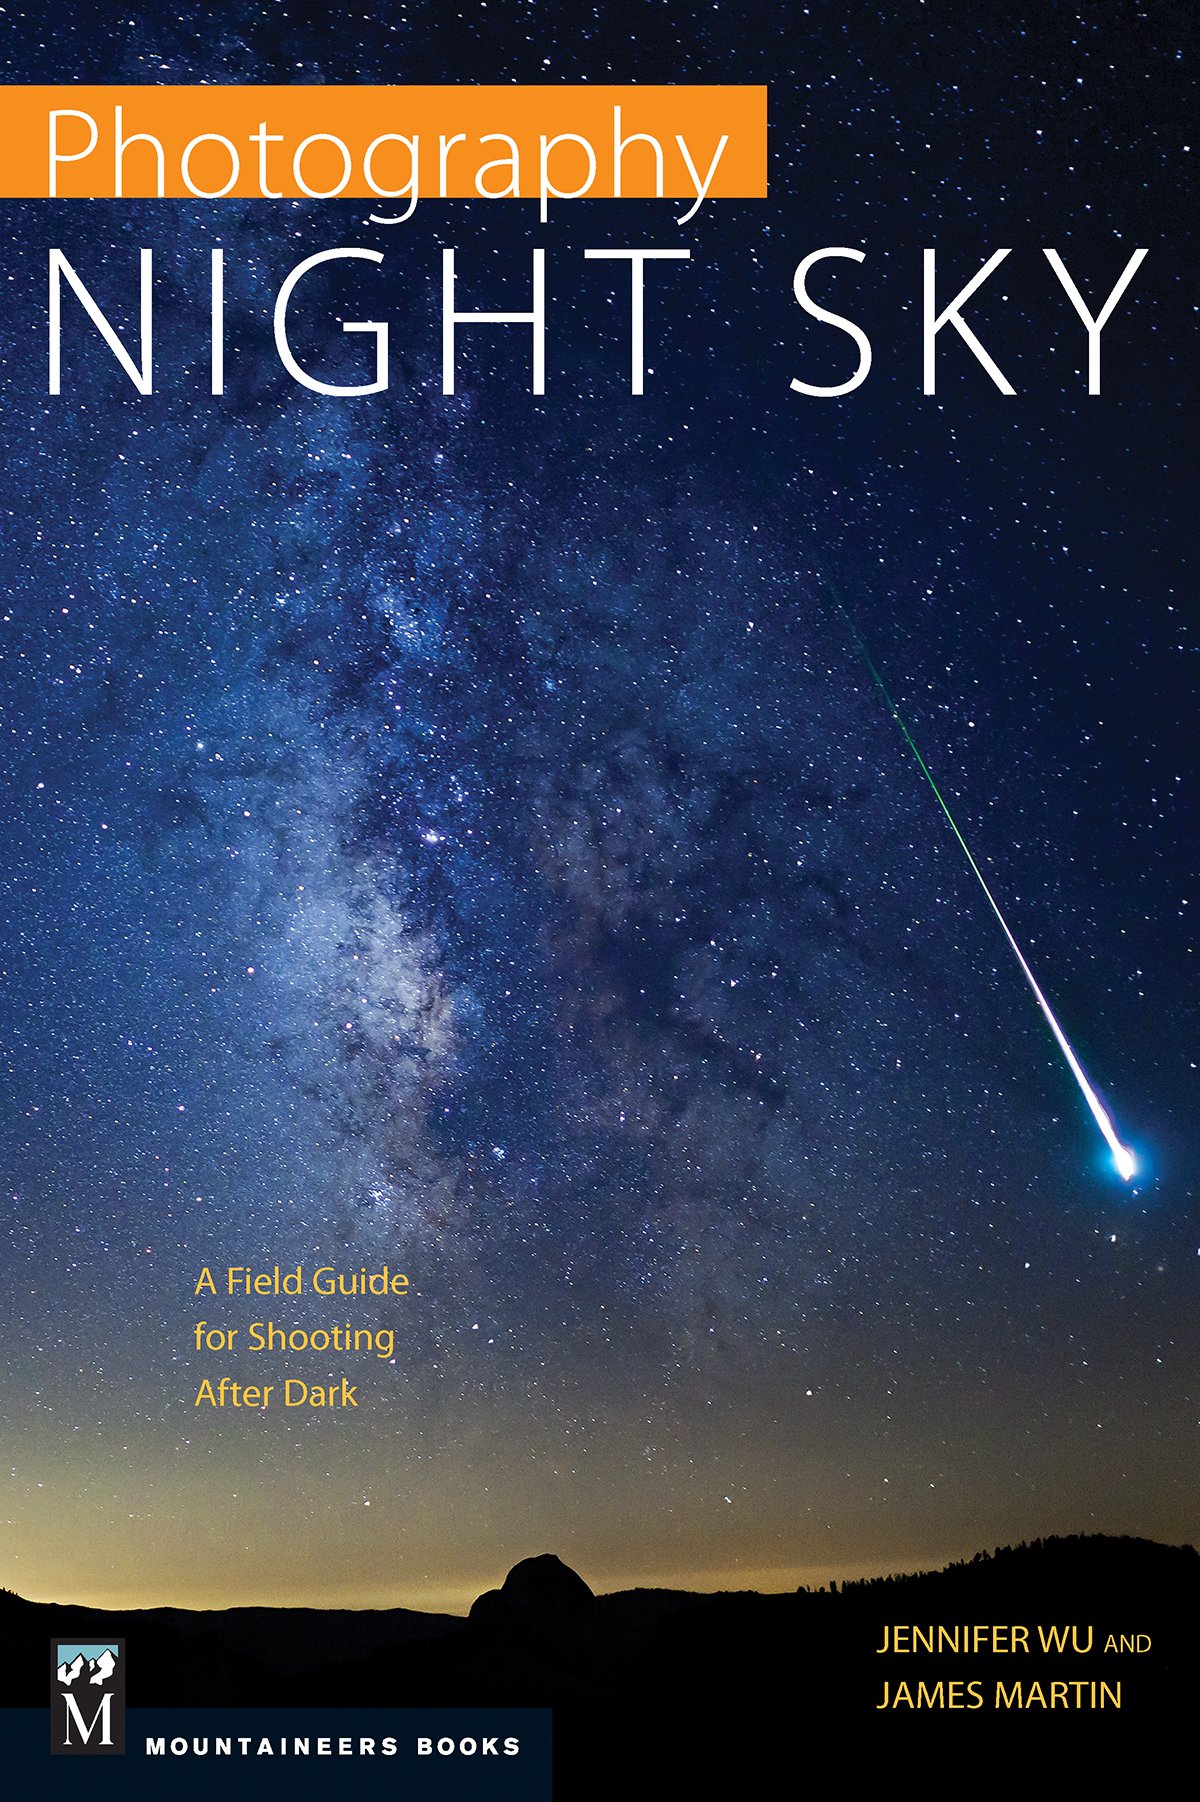 Amazon.com: Photography: Night Sky: A Field Guide for Shooting after ...